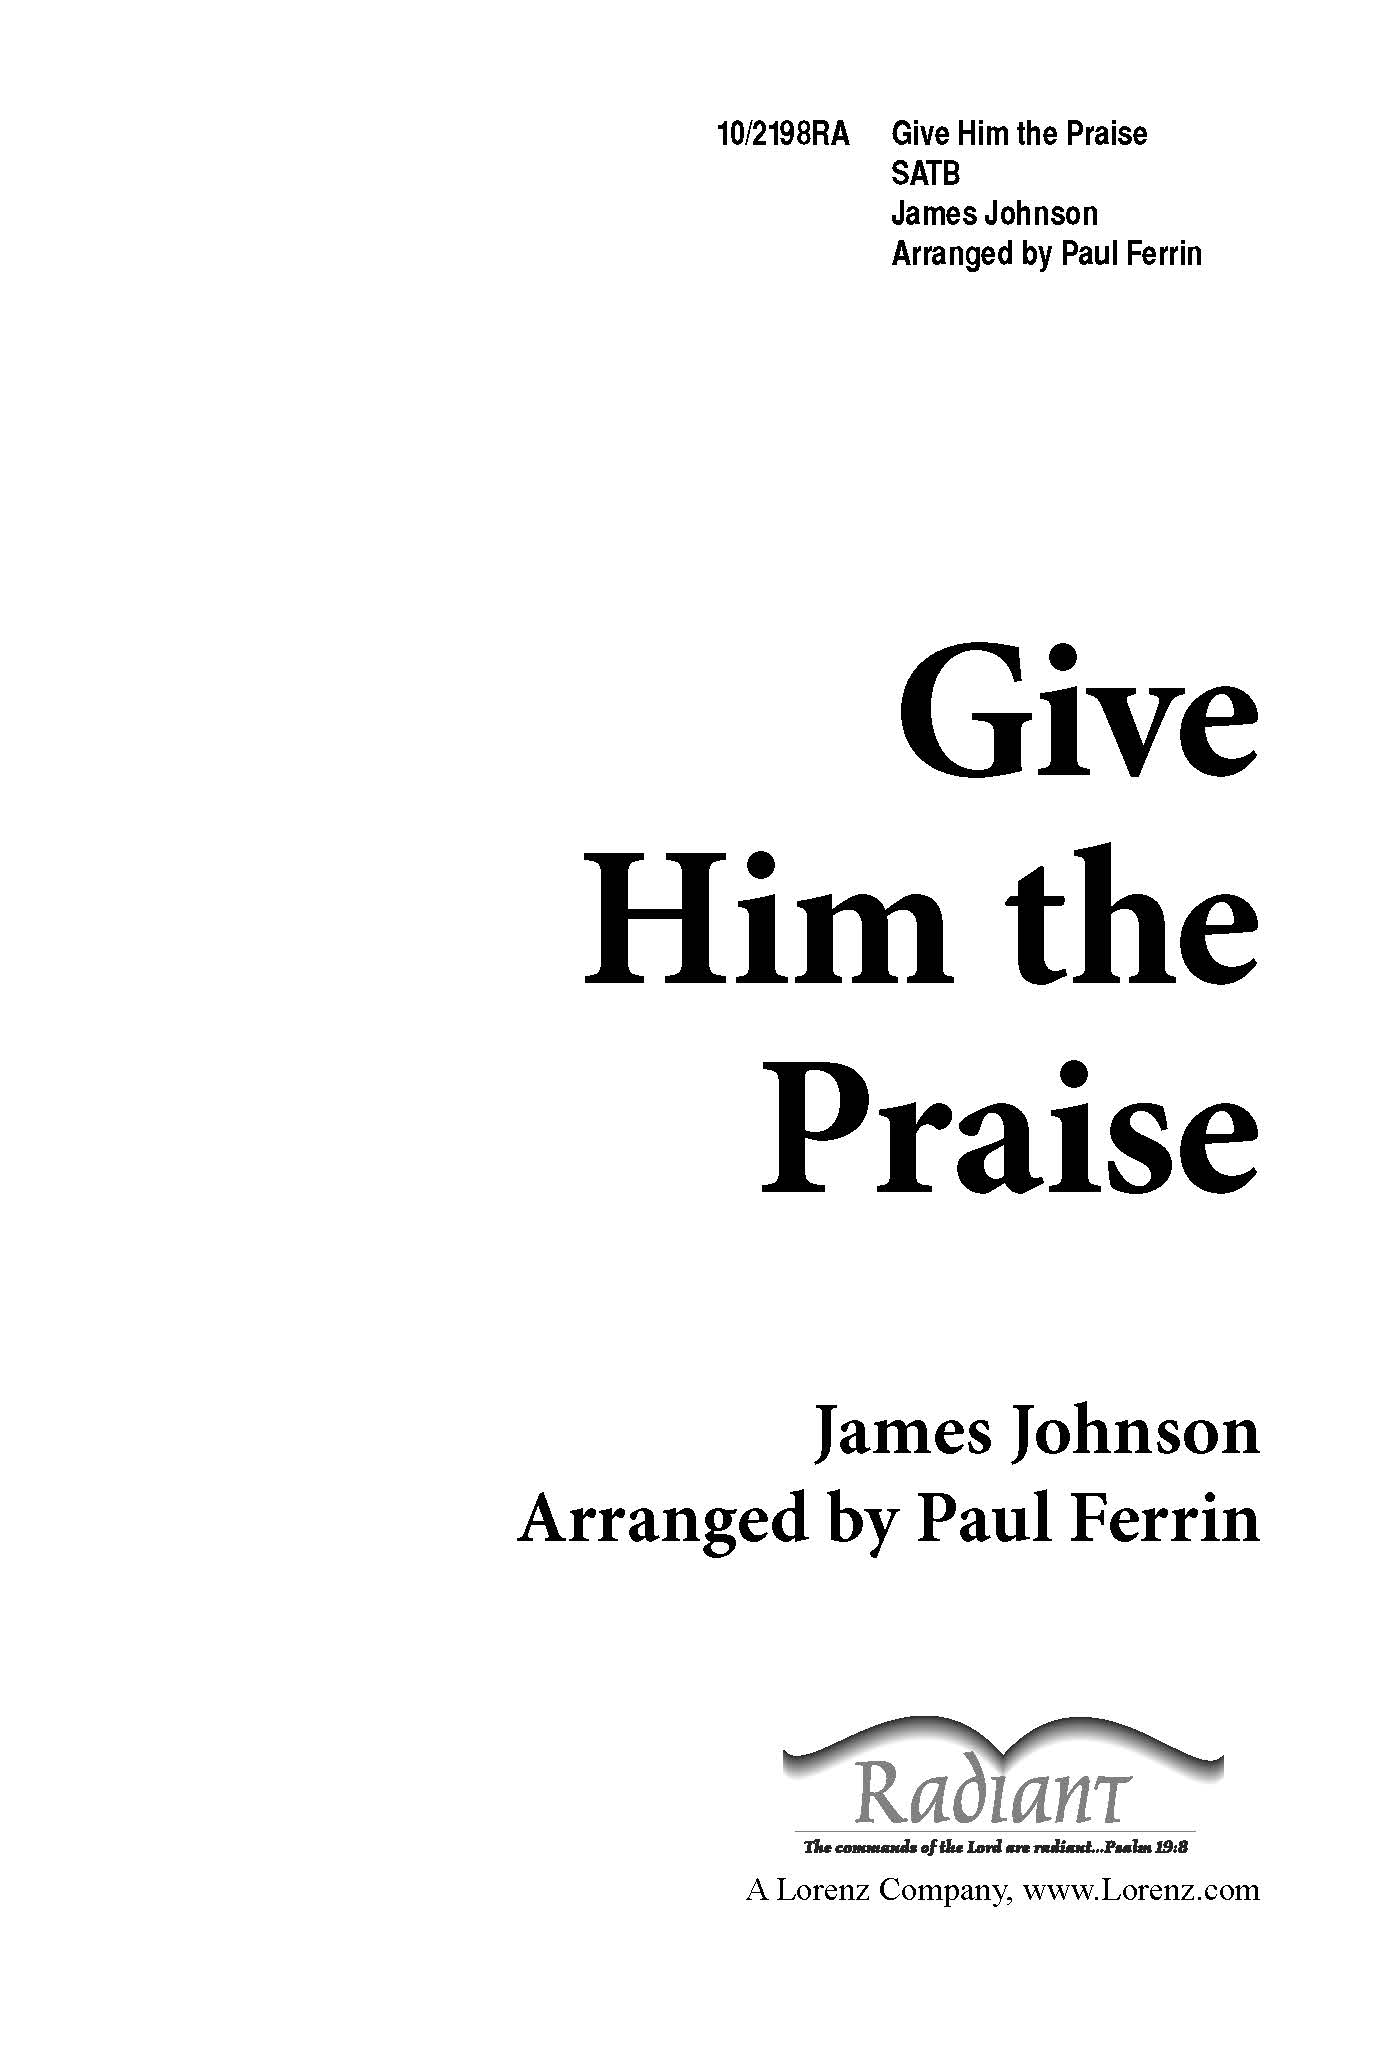 Give Him the Praise